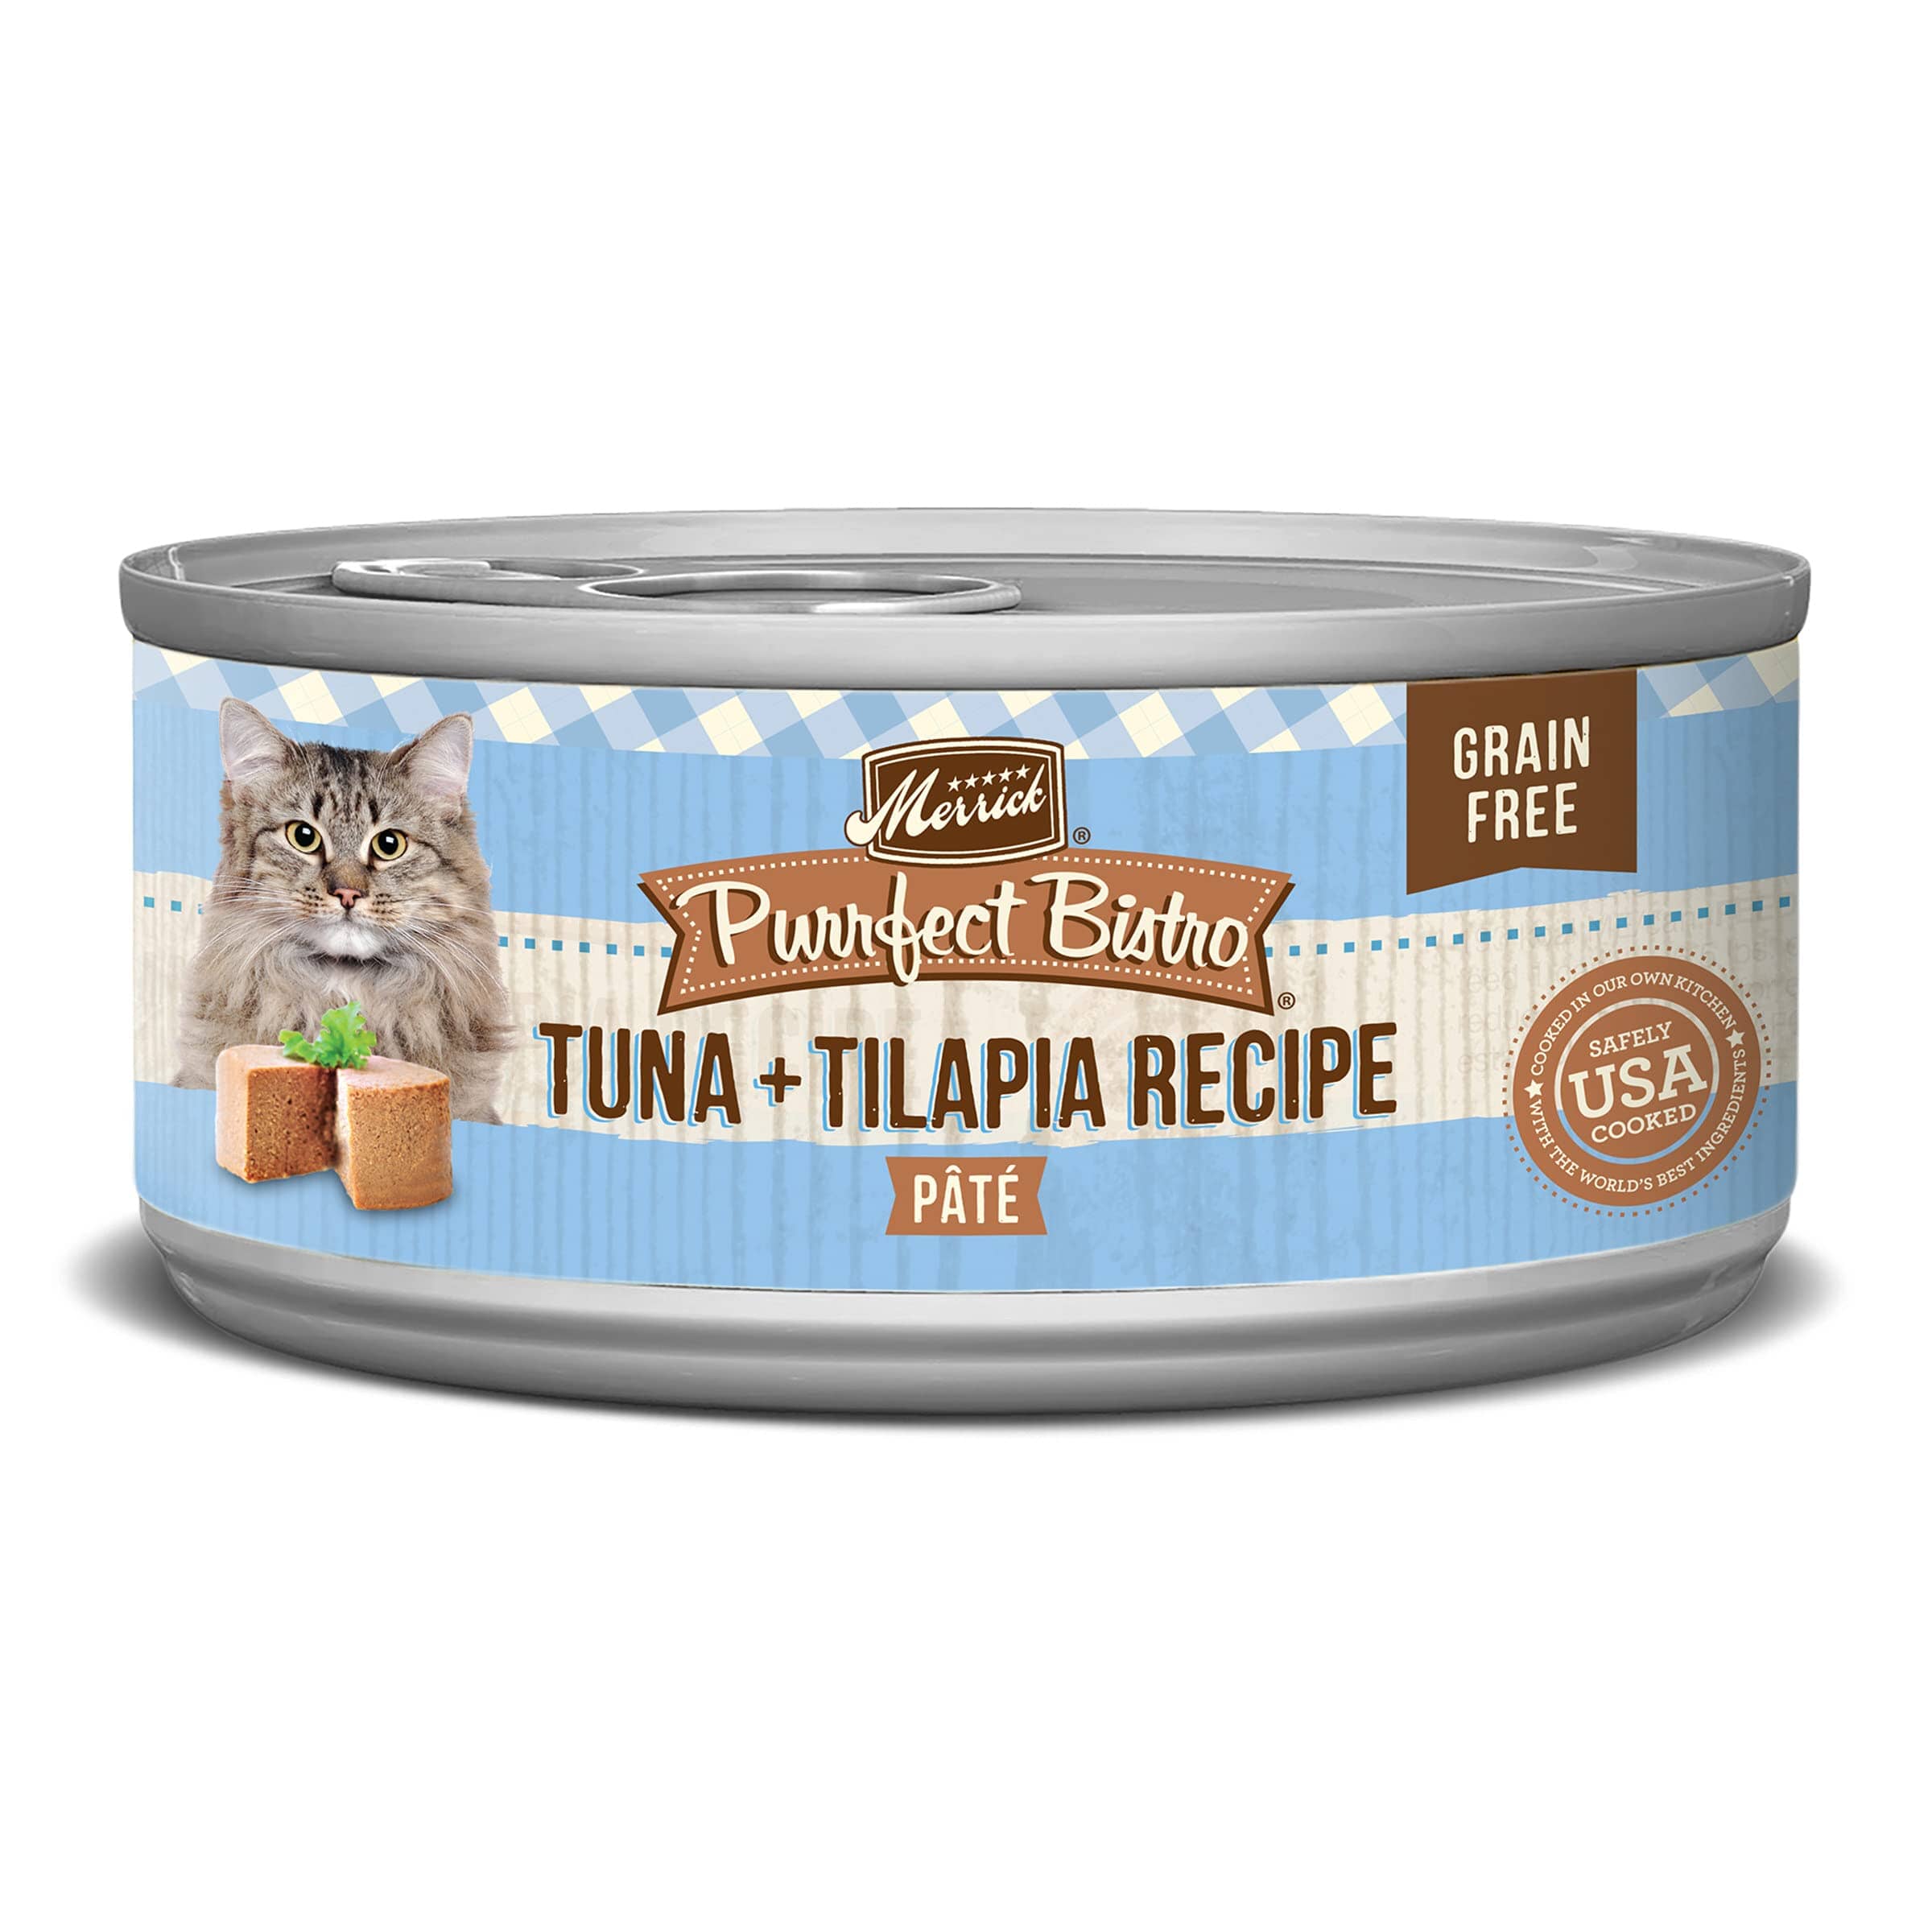 Merrick Purrfect Bistro Tuna and Tilapia Canned Cat Food - 3 Oz - Case of 24  